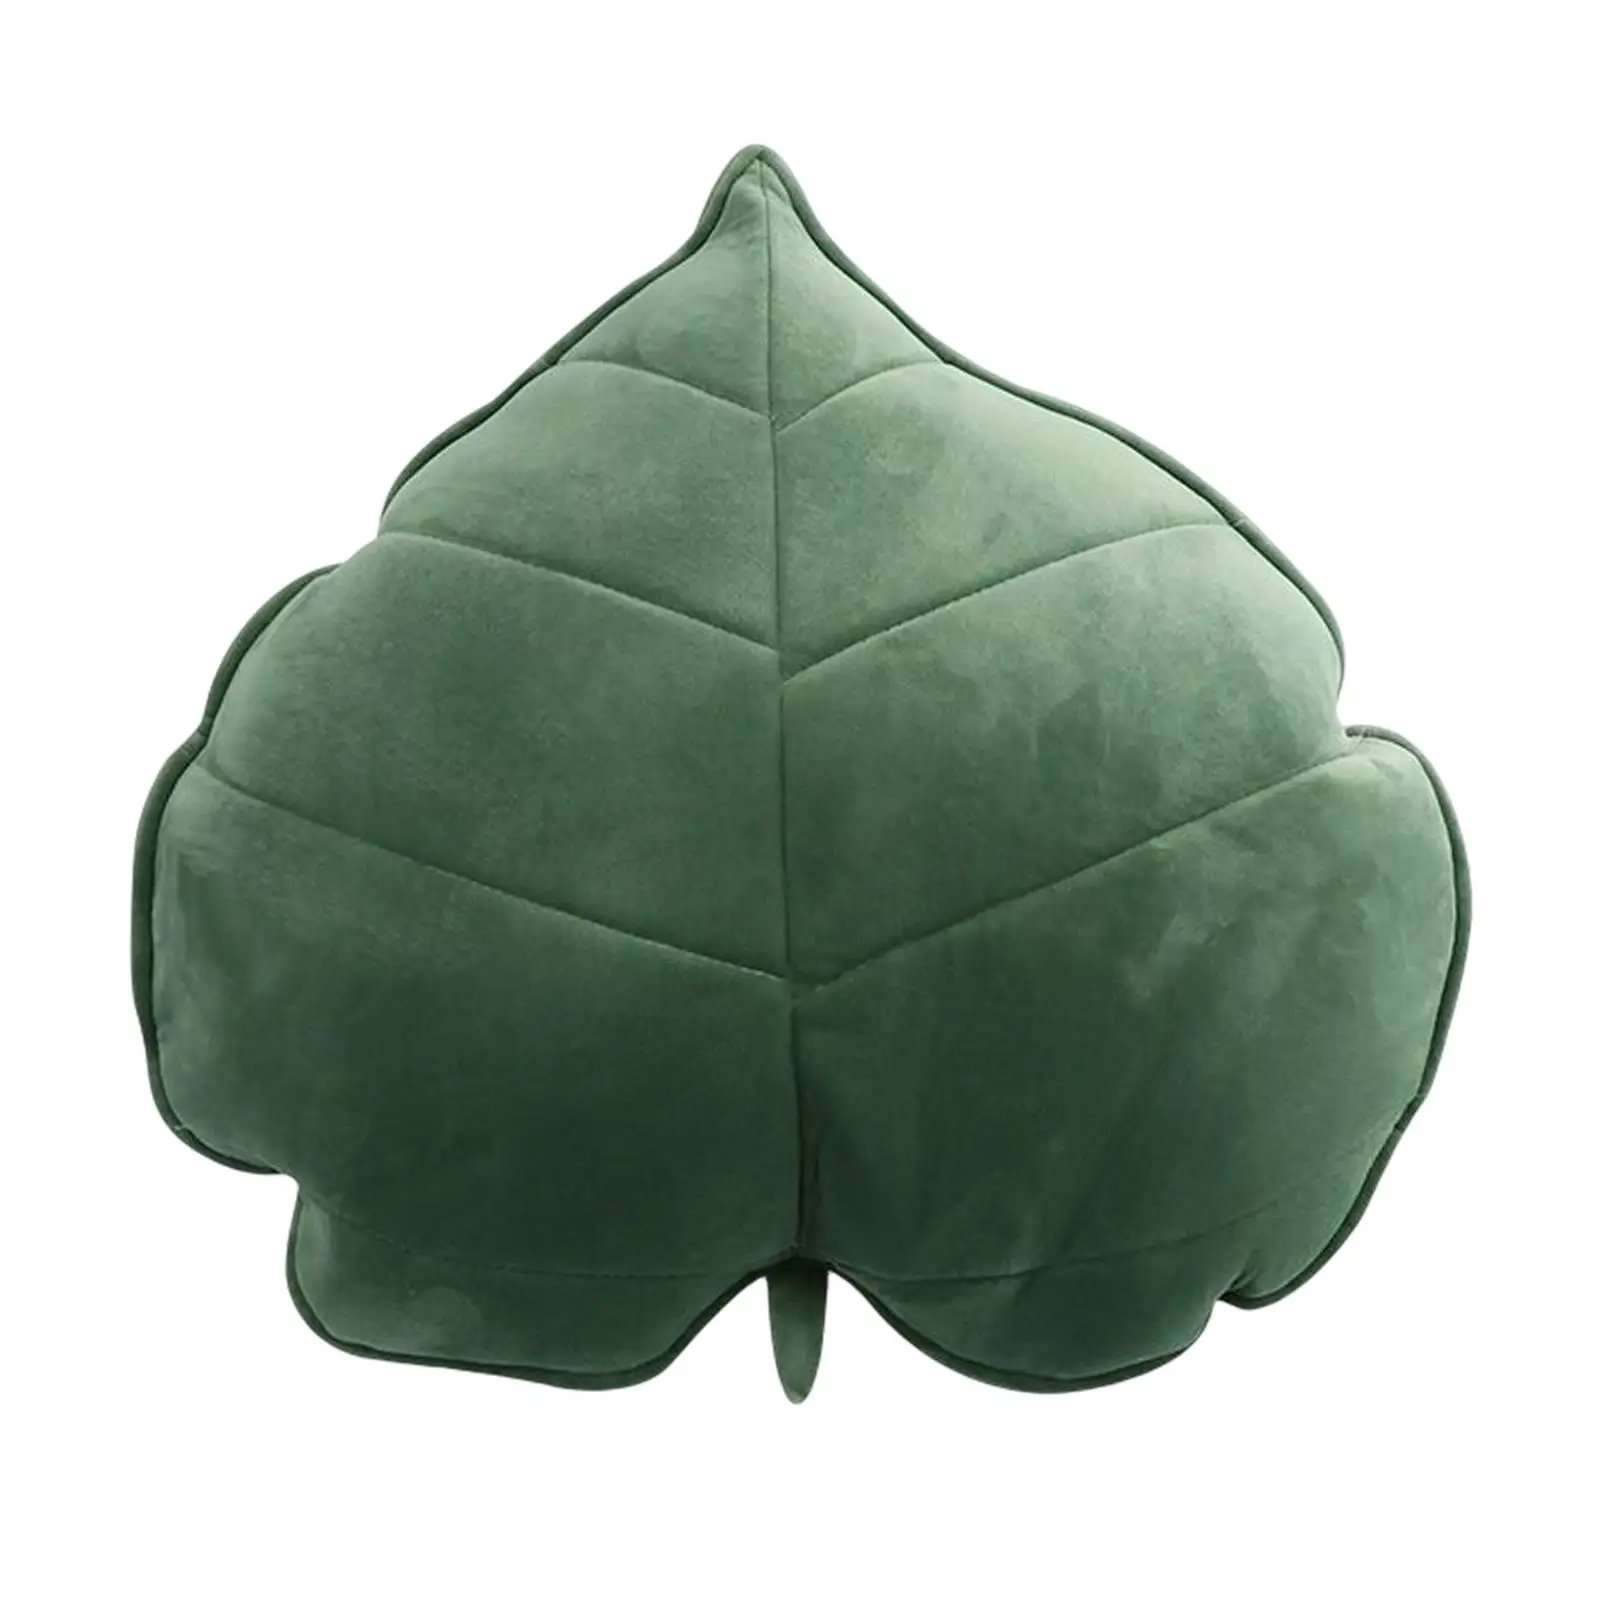 Lovely Leaf Plush Hug Pillow Practical Durable Ornament Cute Chair Cushion for Children Room Holiday Bedroom Home Decor Sleeping